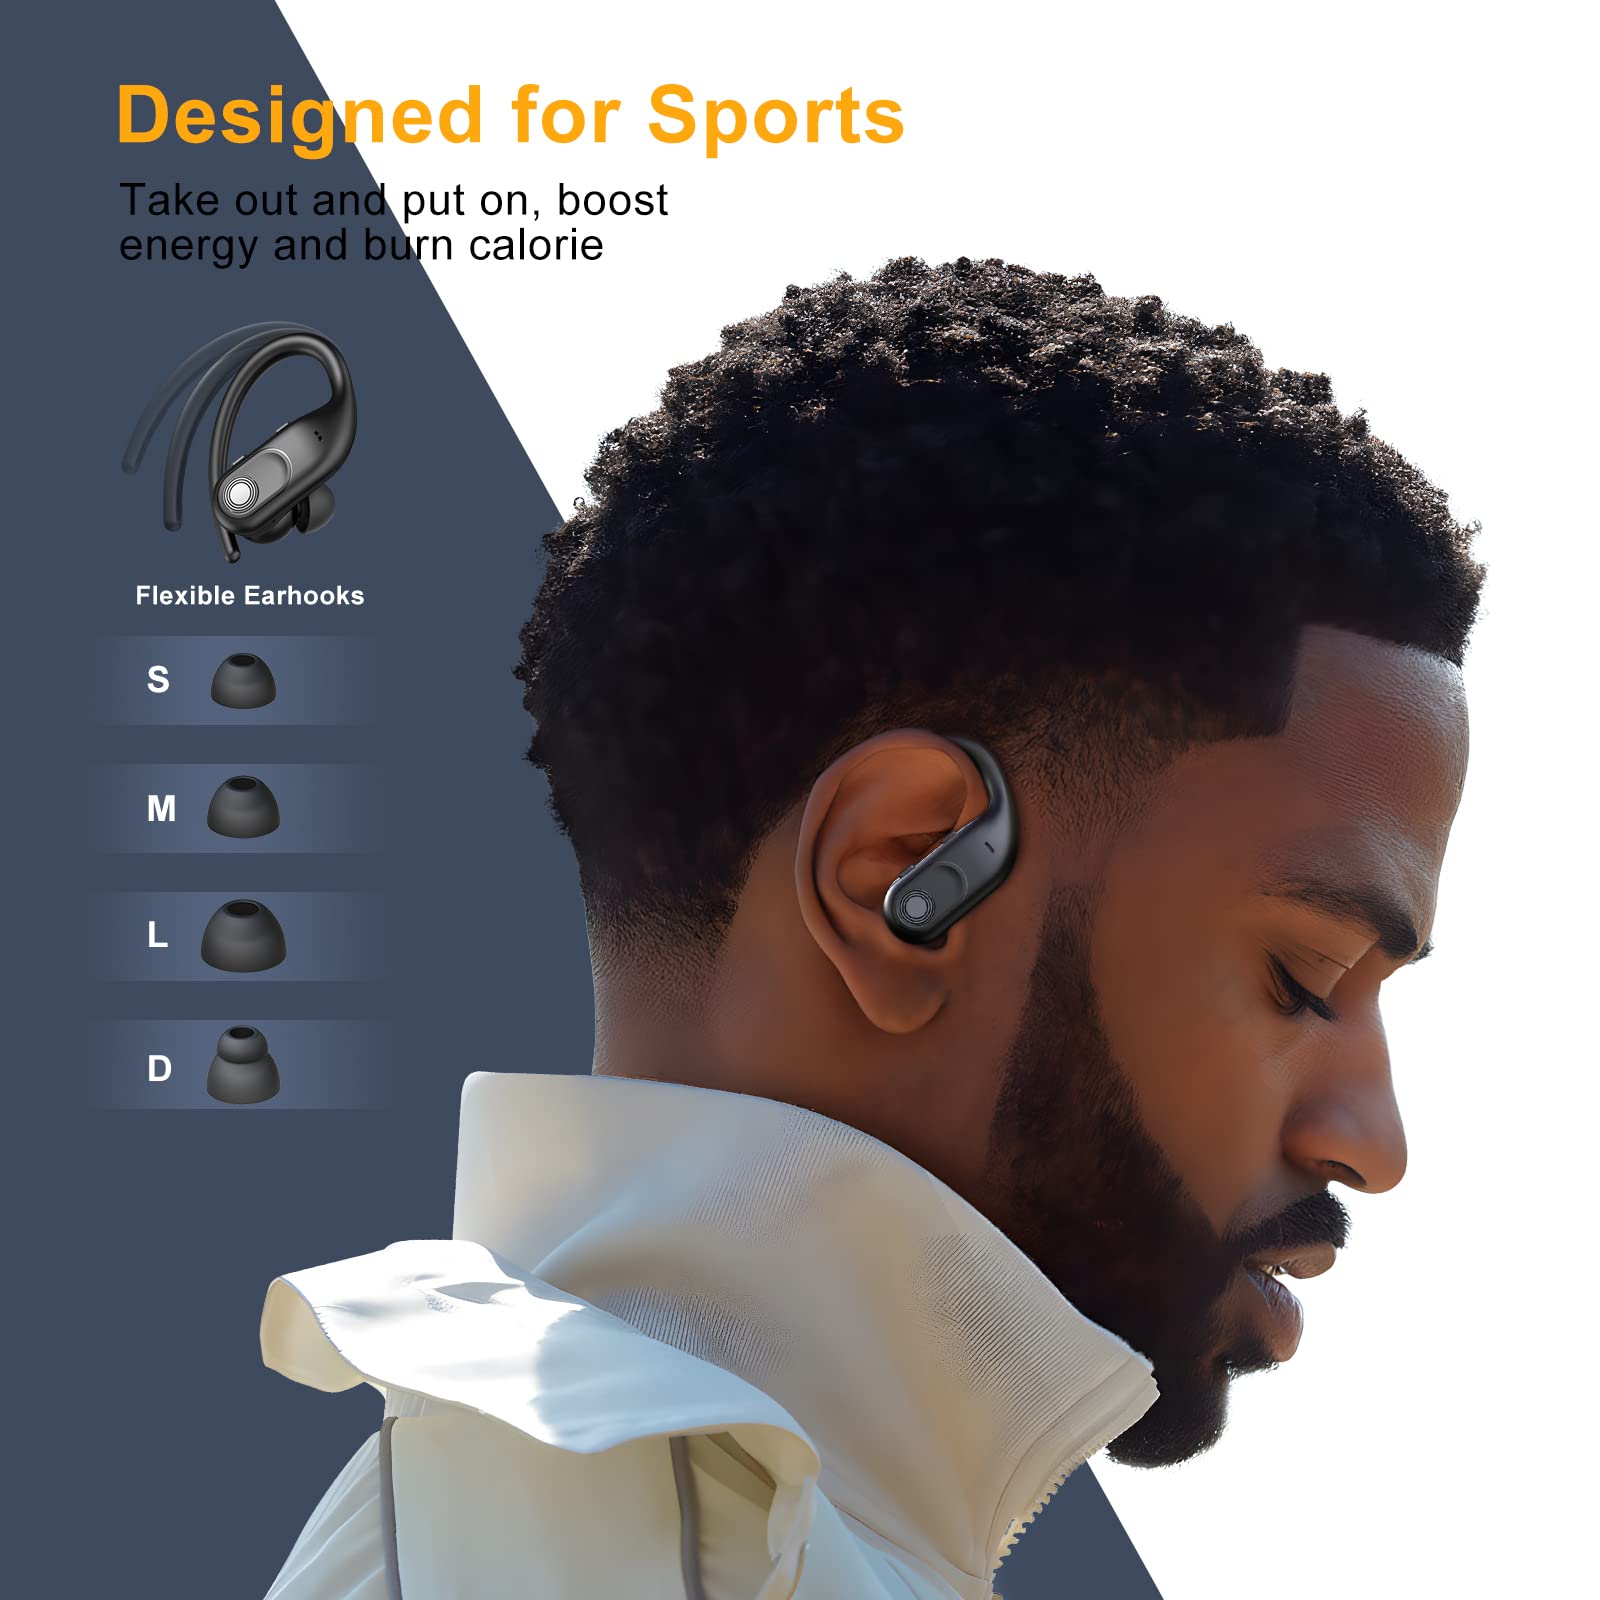 Wireless Earbuds Bluetooth Headphones 130Hrs Playtime with 2500mAh Wireless Charging Case LED Diaplay Hi-Fi Waterproof Over Ear Earphones for Sports Running Workout Gaming